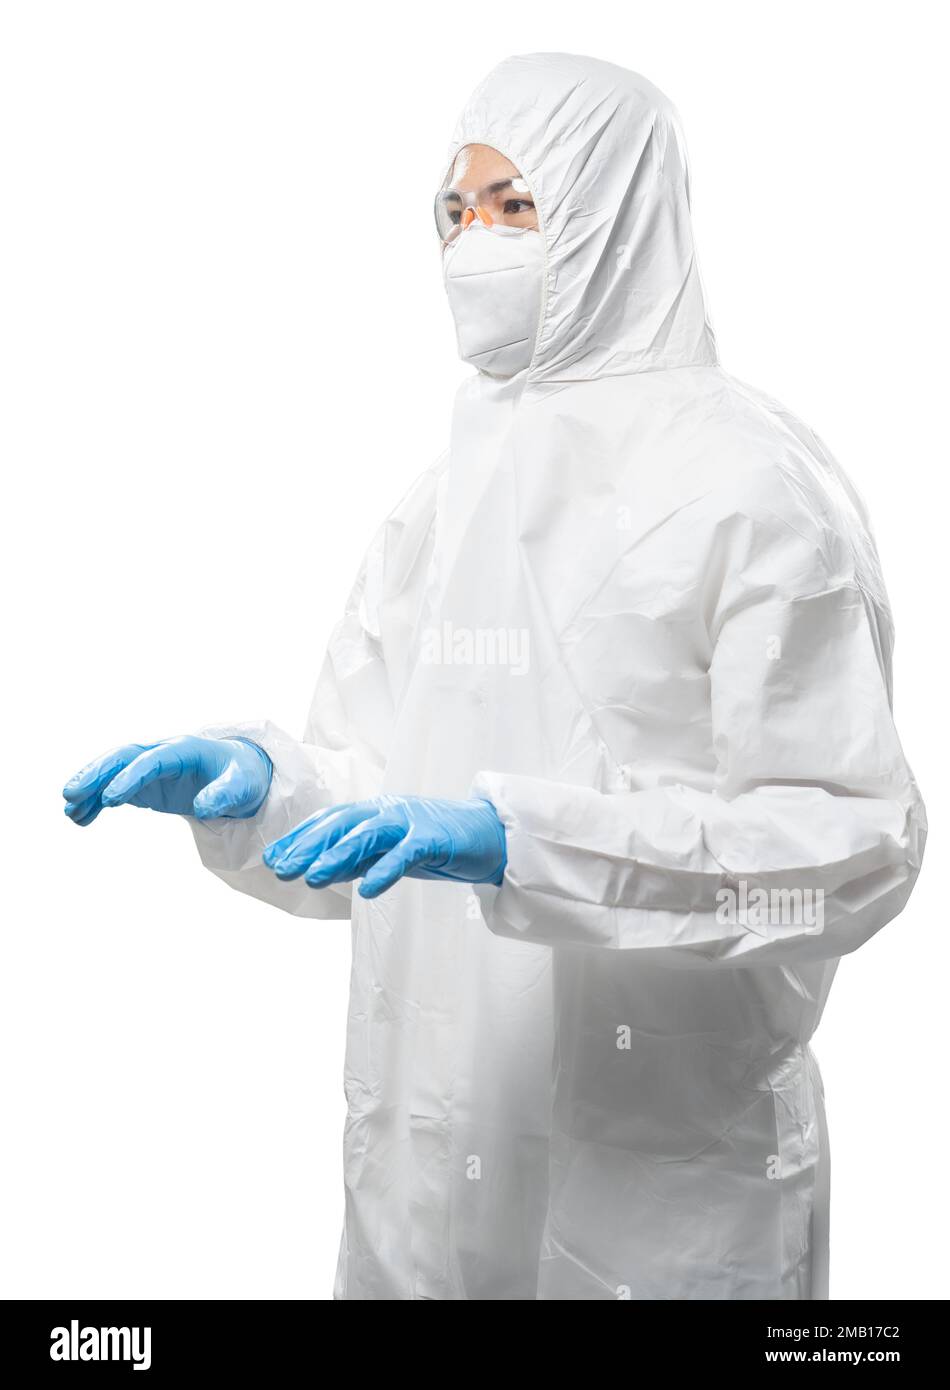 Worker wears medical protective suit or white coverall suit with mask and goggles empty hand typin isolated on white background Stock Photo